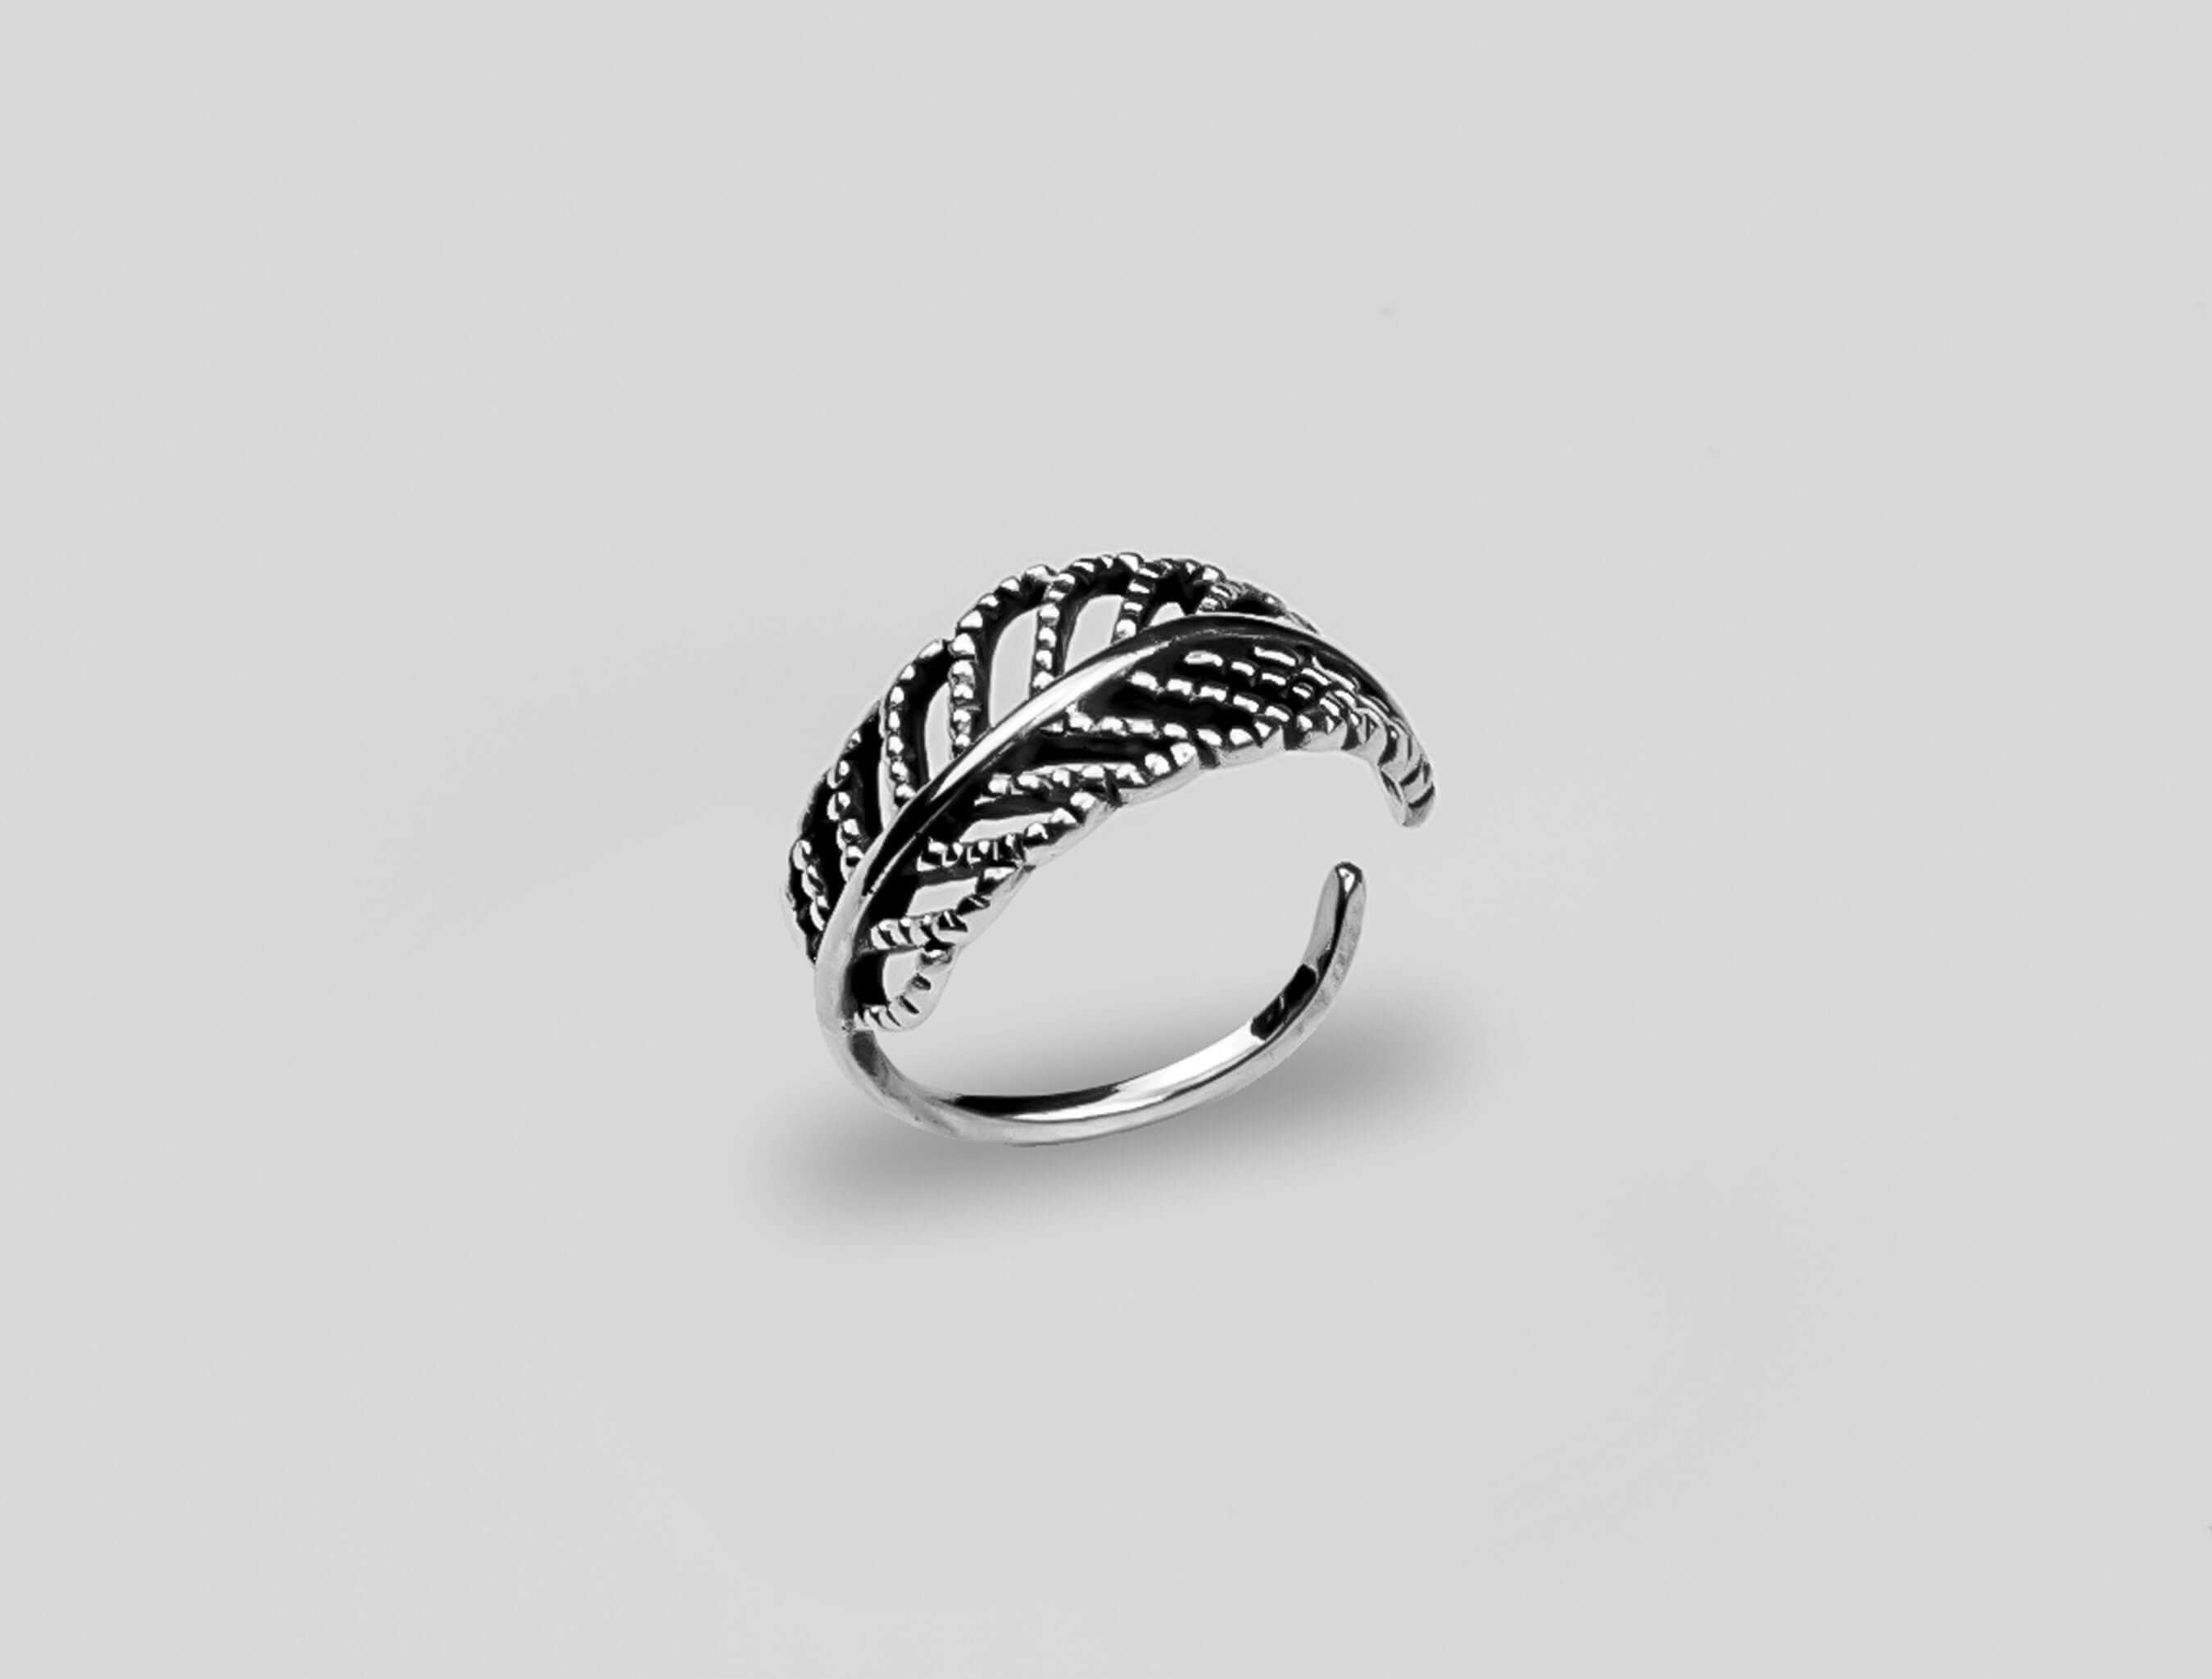 Leaf Pattern Silver 925 Ring, Boho Silver Ring, Adjustable Silver Ring, Best Gift for Women, Sterling Silver Ring, Silver Chance Ring